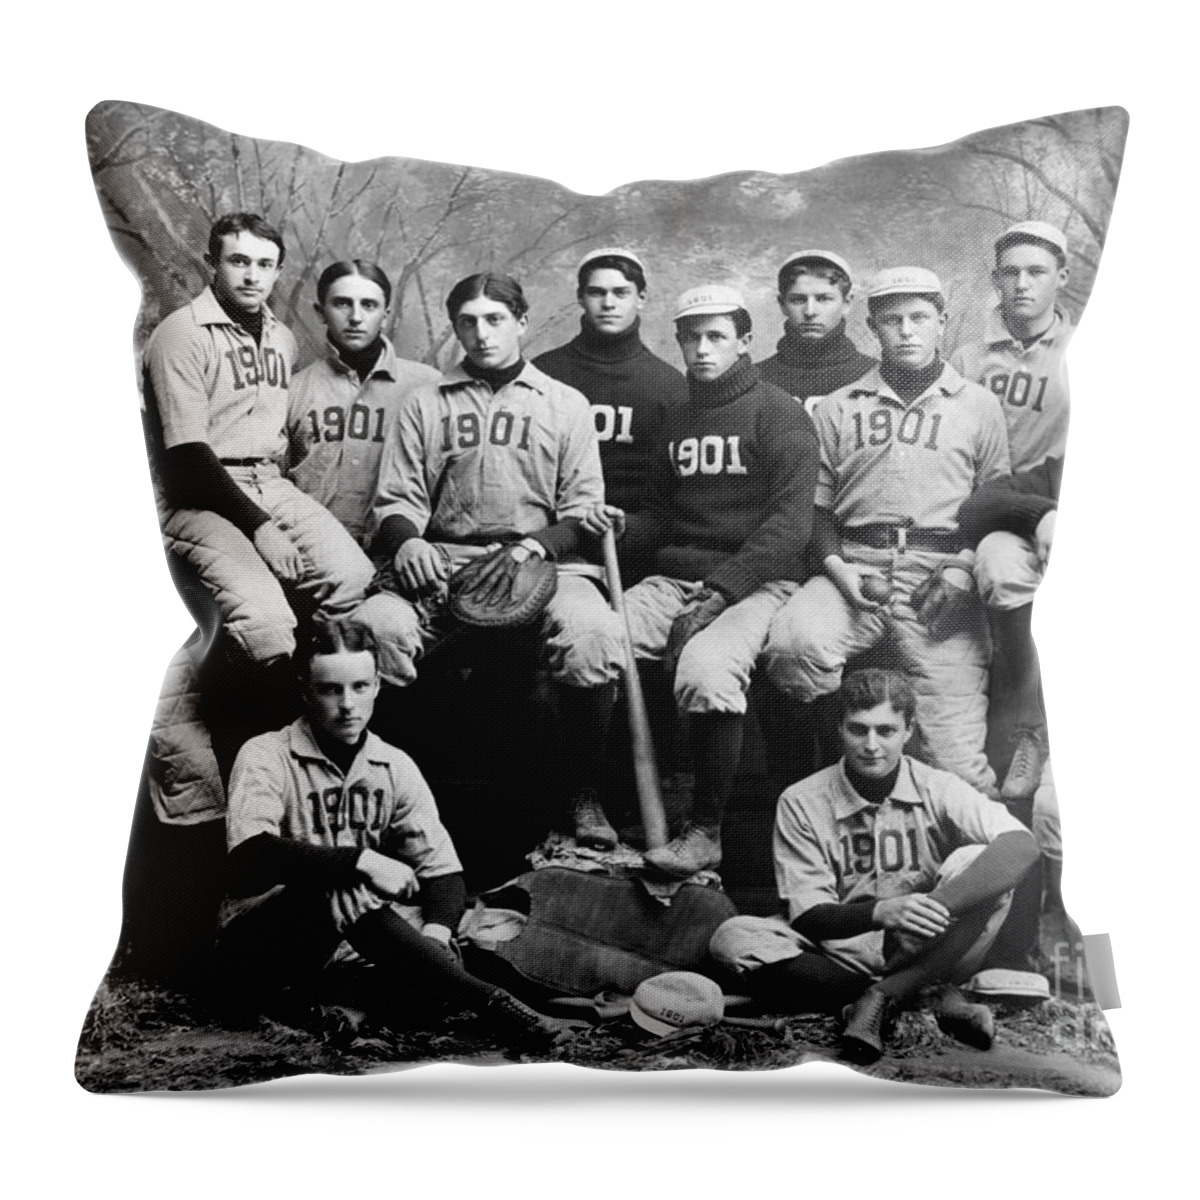 1901 Throw Pillow featuring the photograph Yale Baseball Team, 1901 by Granger